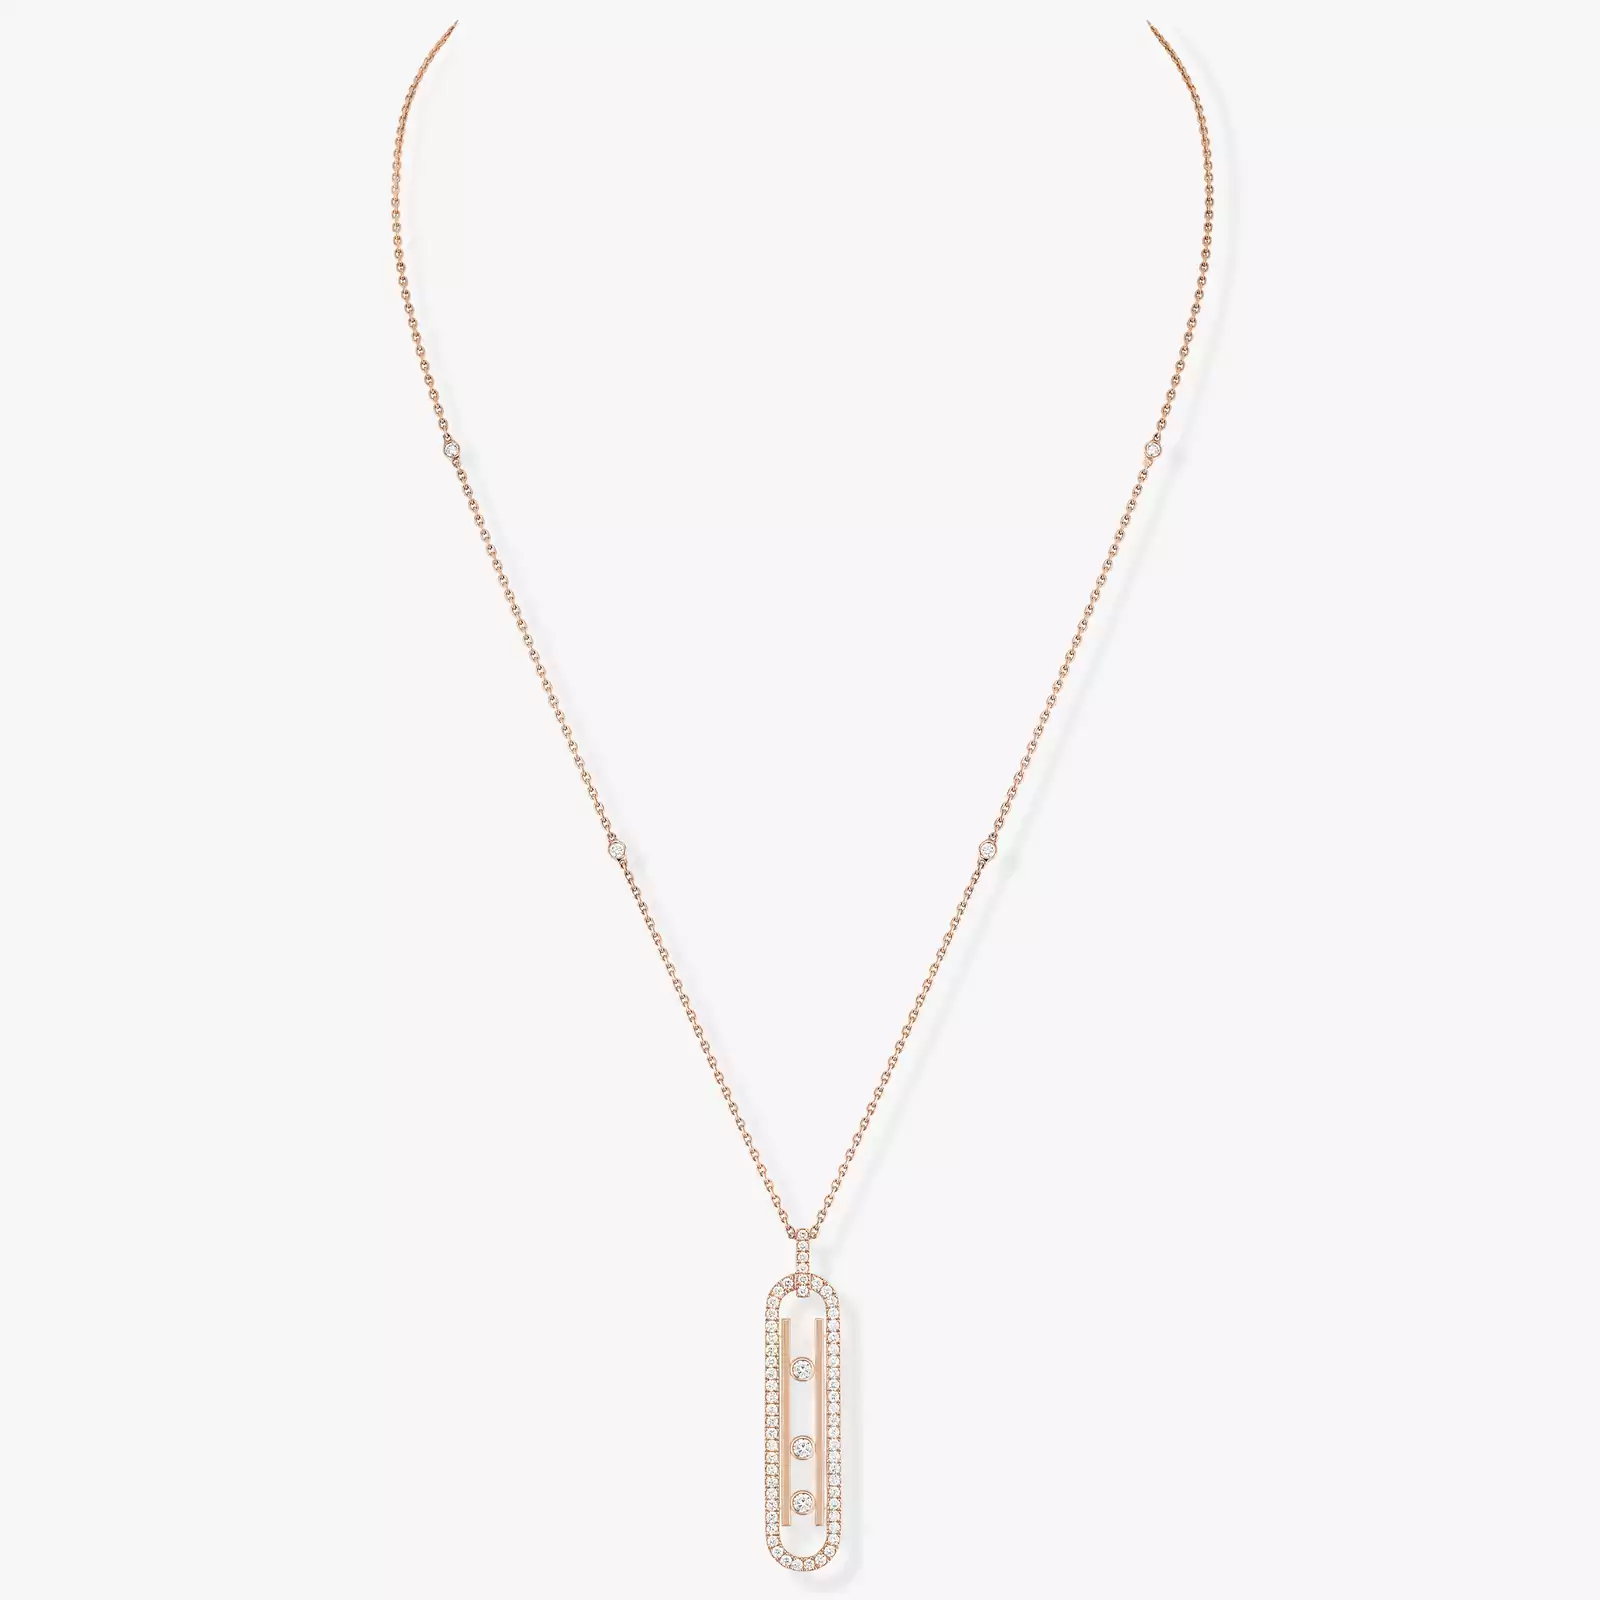 Move 10th SM Necklace Pink Gold For Her Diamond Necklace 10032-PG